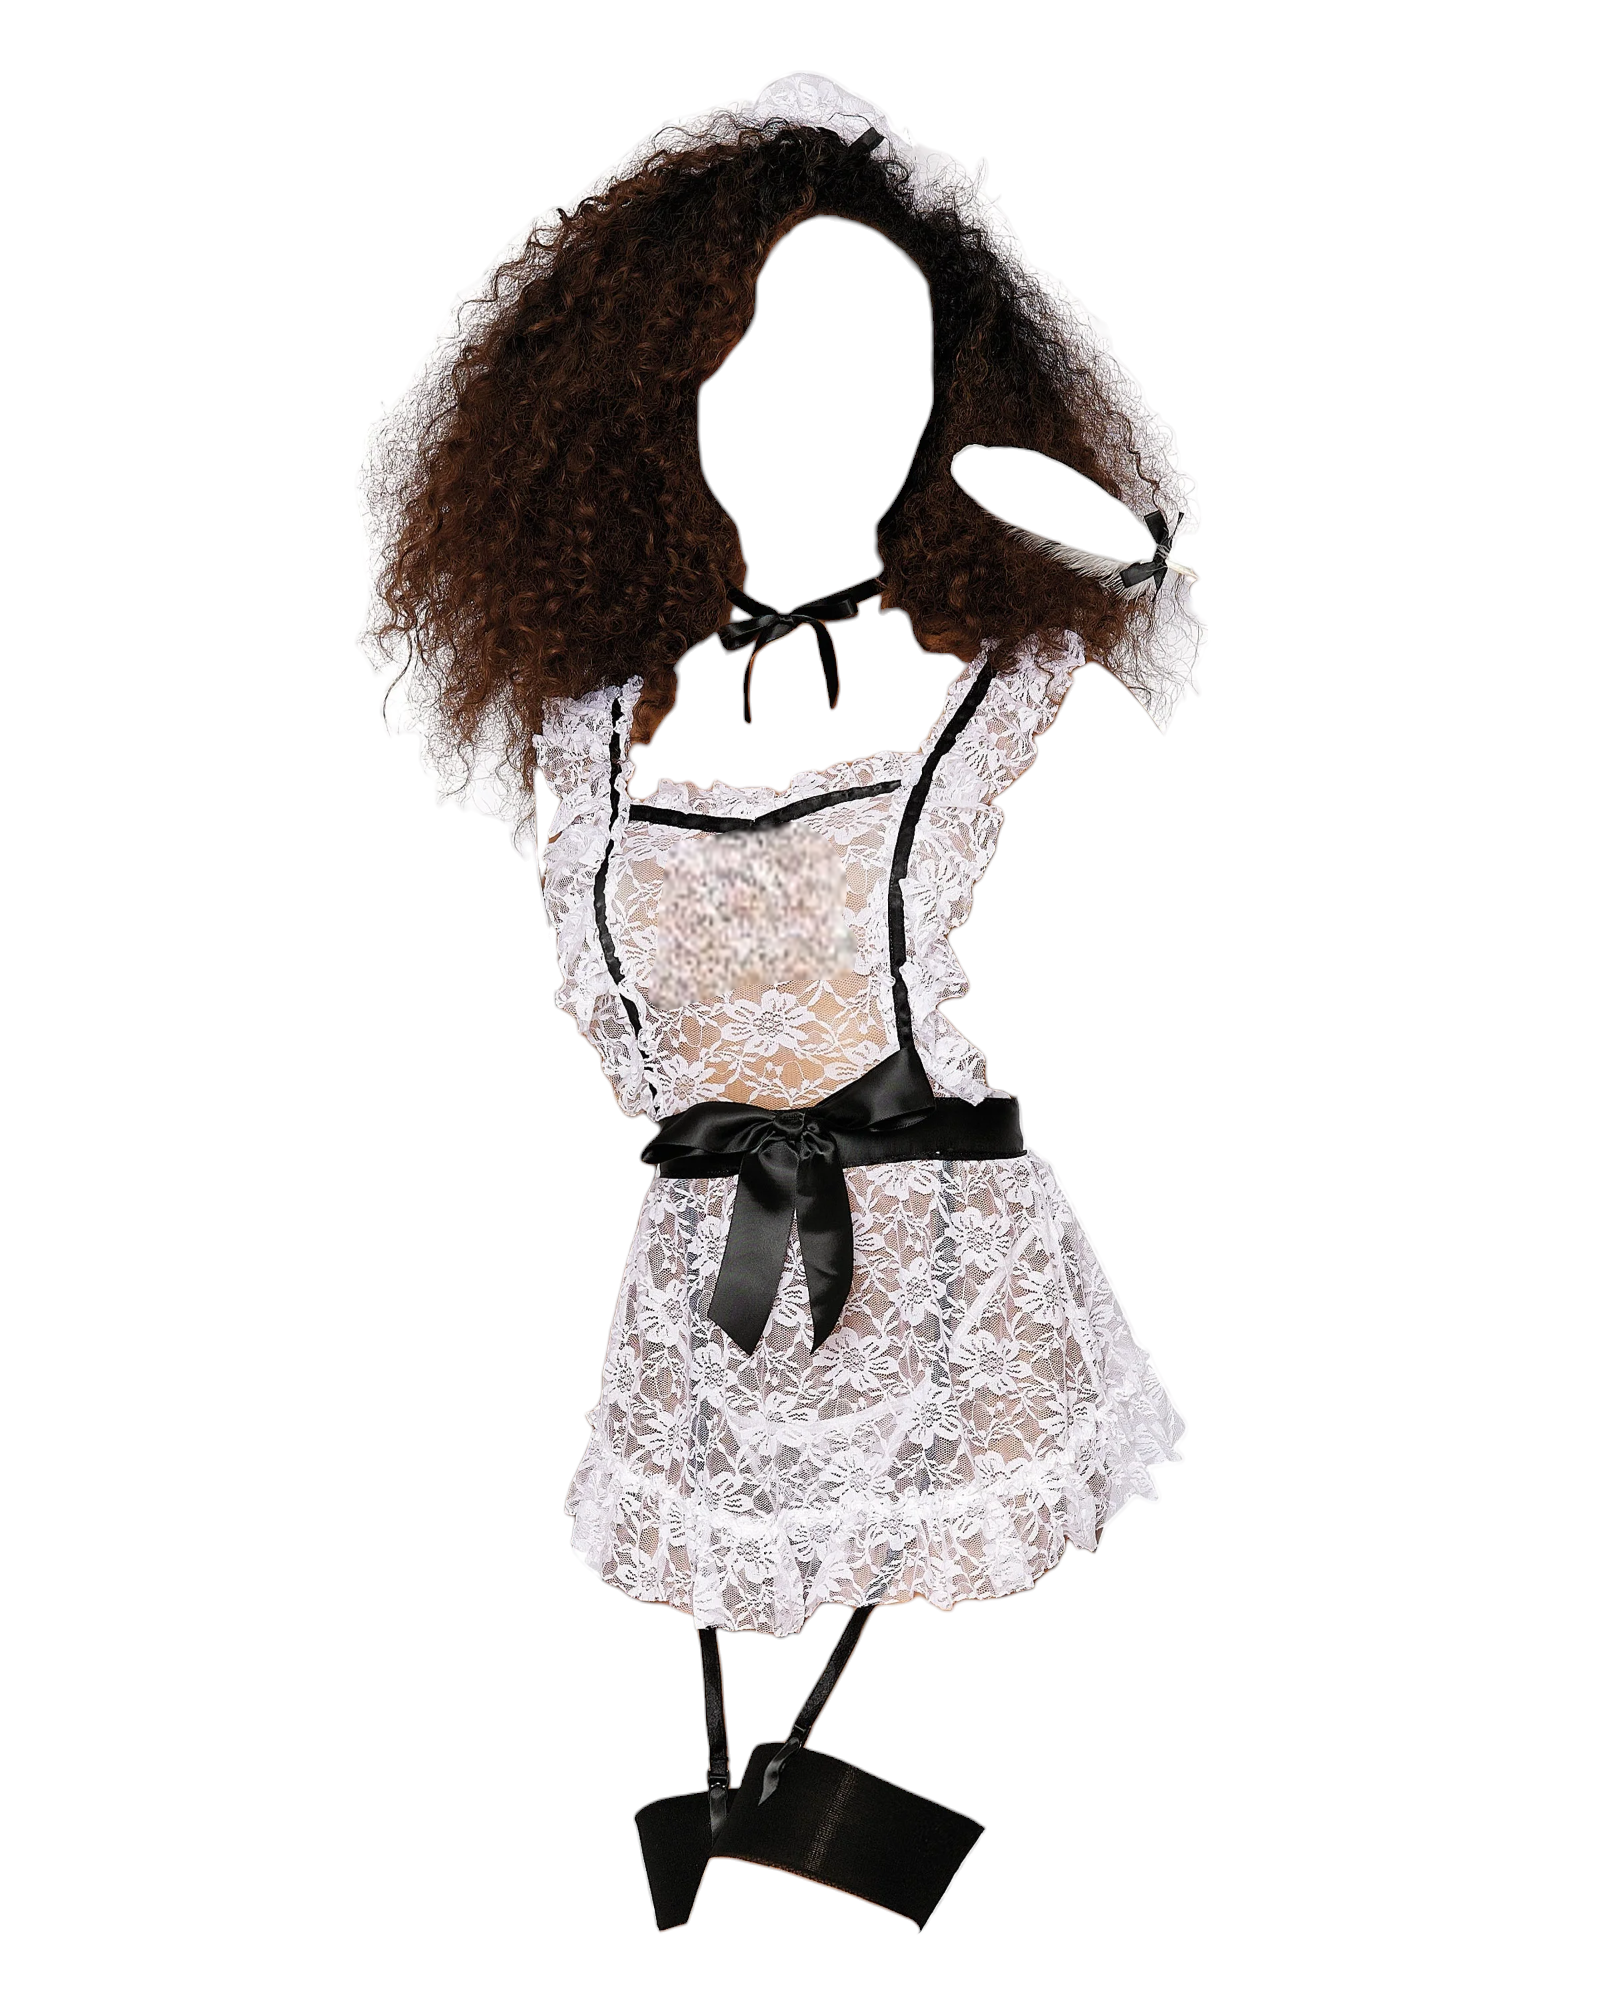 Dreamgirl Maid To Tease Lace Apron with Ruffle Details Roleplay Set Black/White One Size